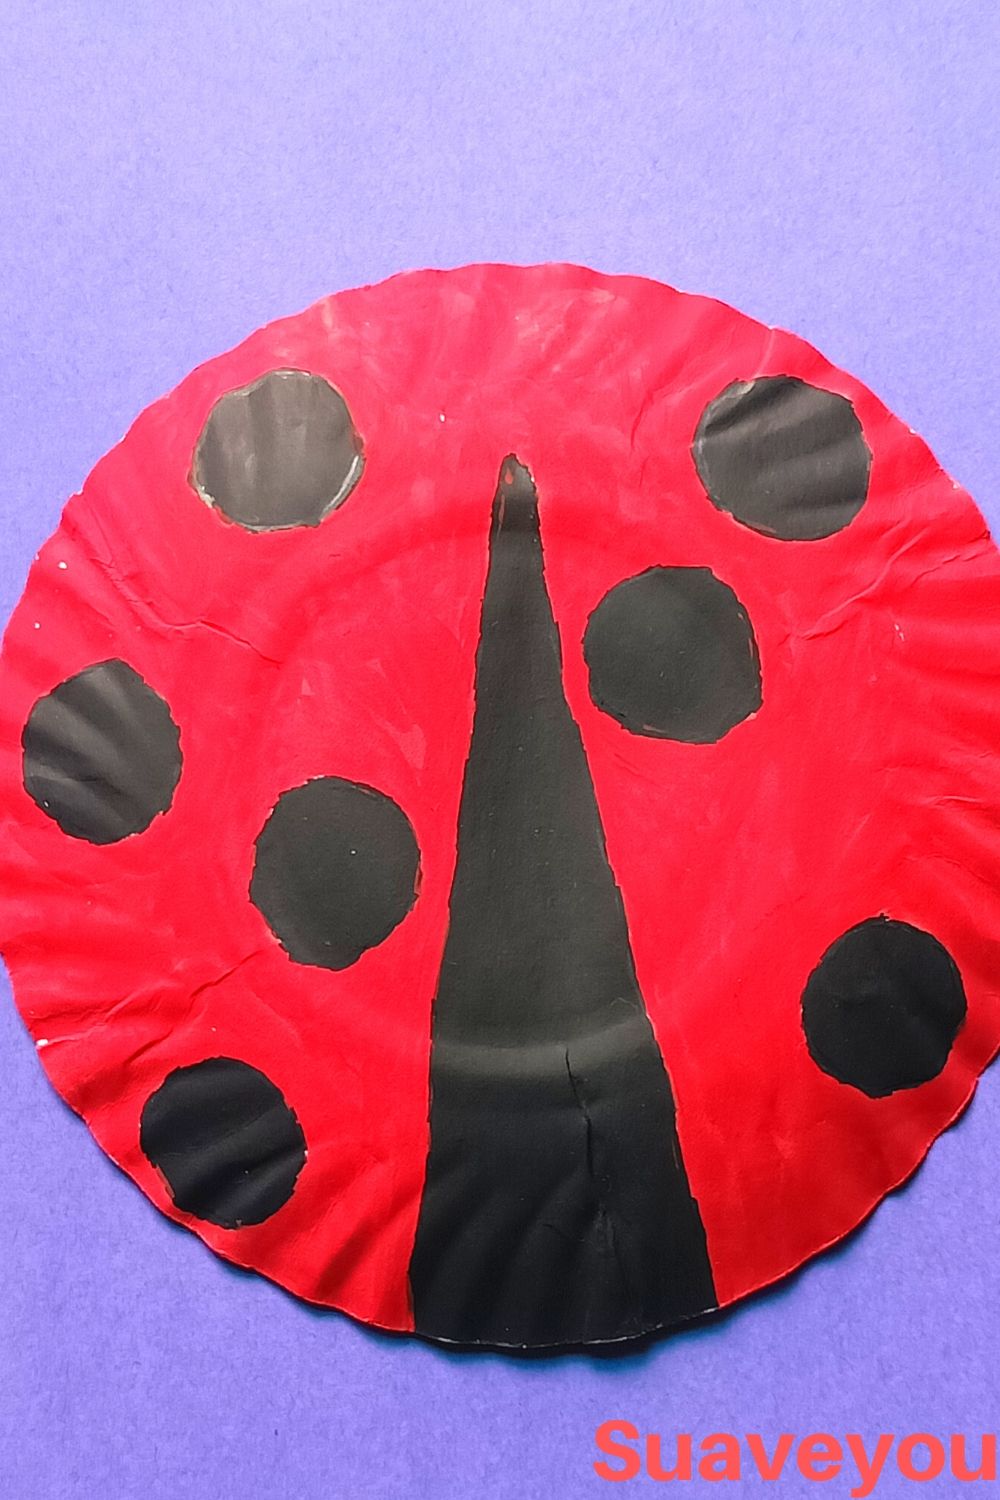 Painting your paper plate in red